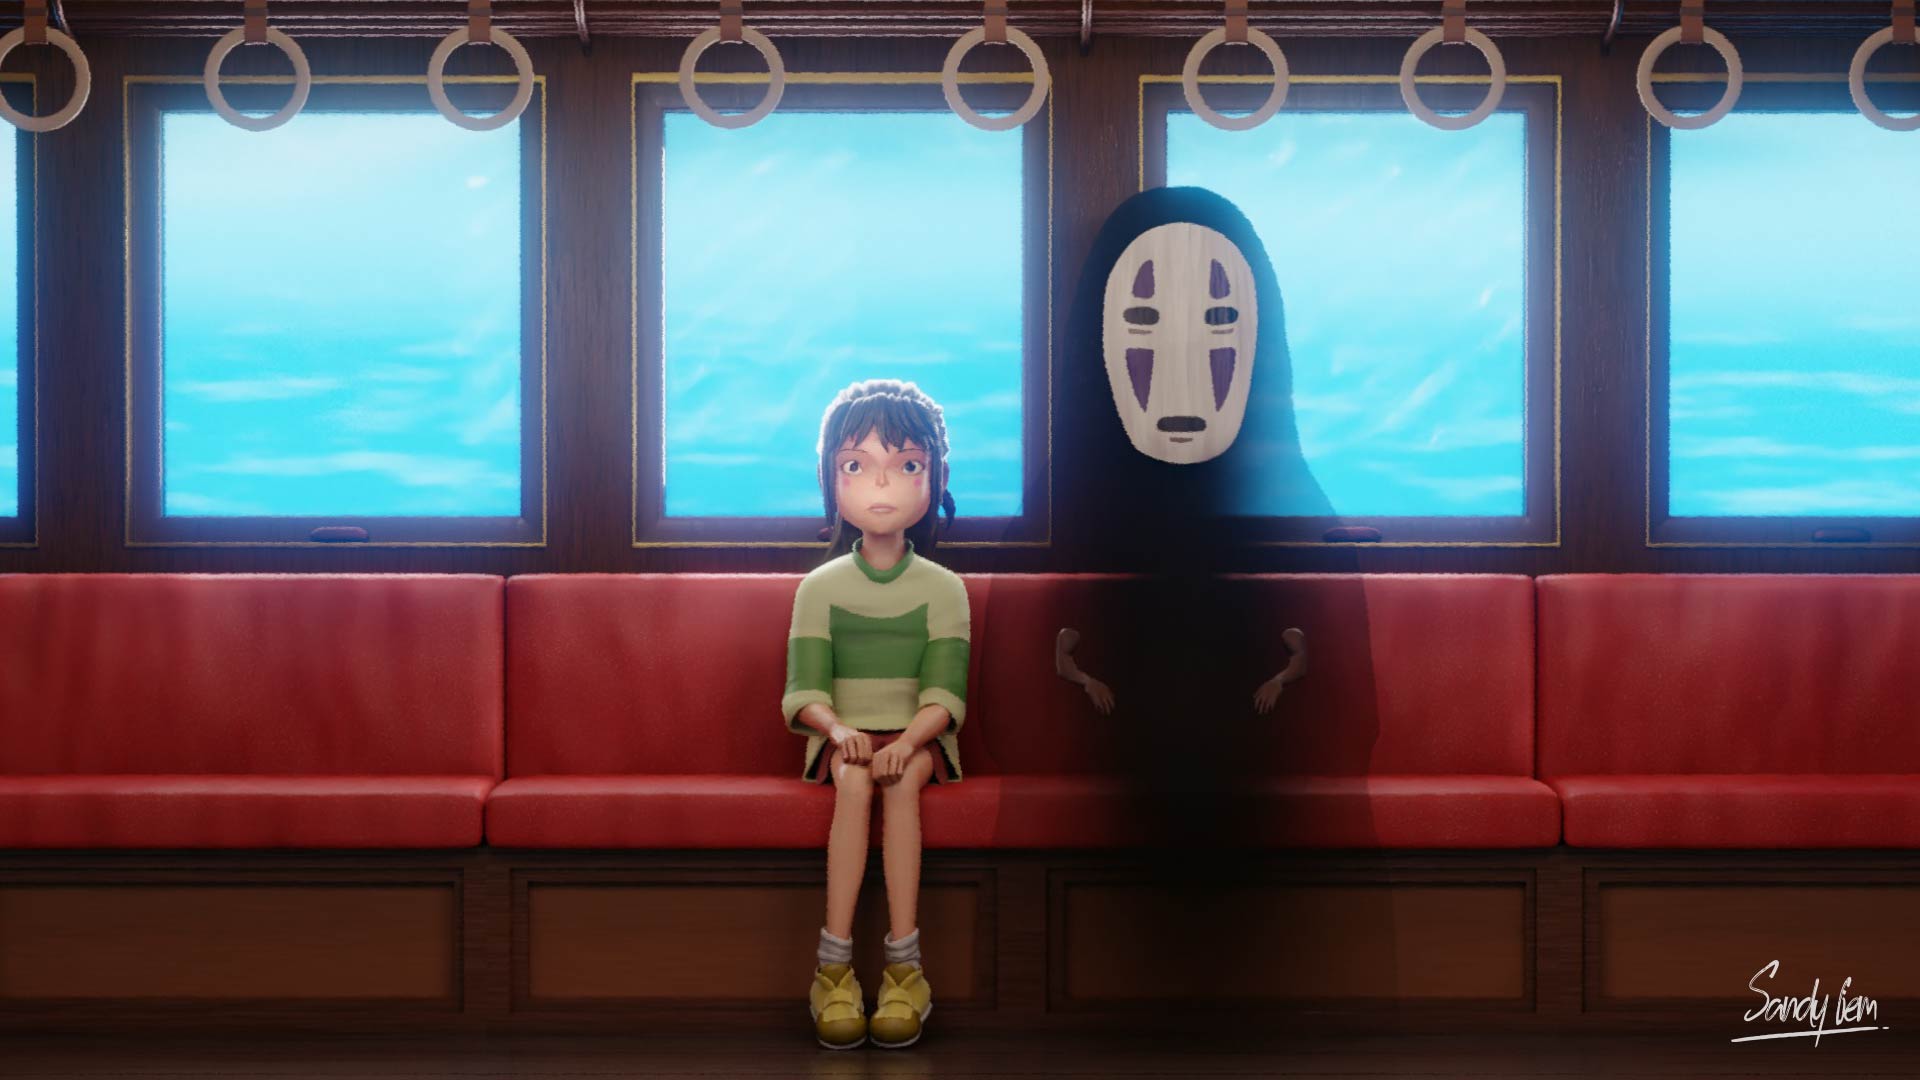 The Small Spirited Away Detail That Sparked A Deep Conversation Among Fans